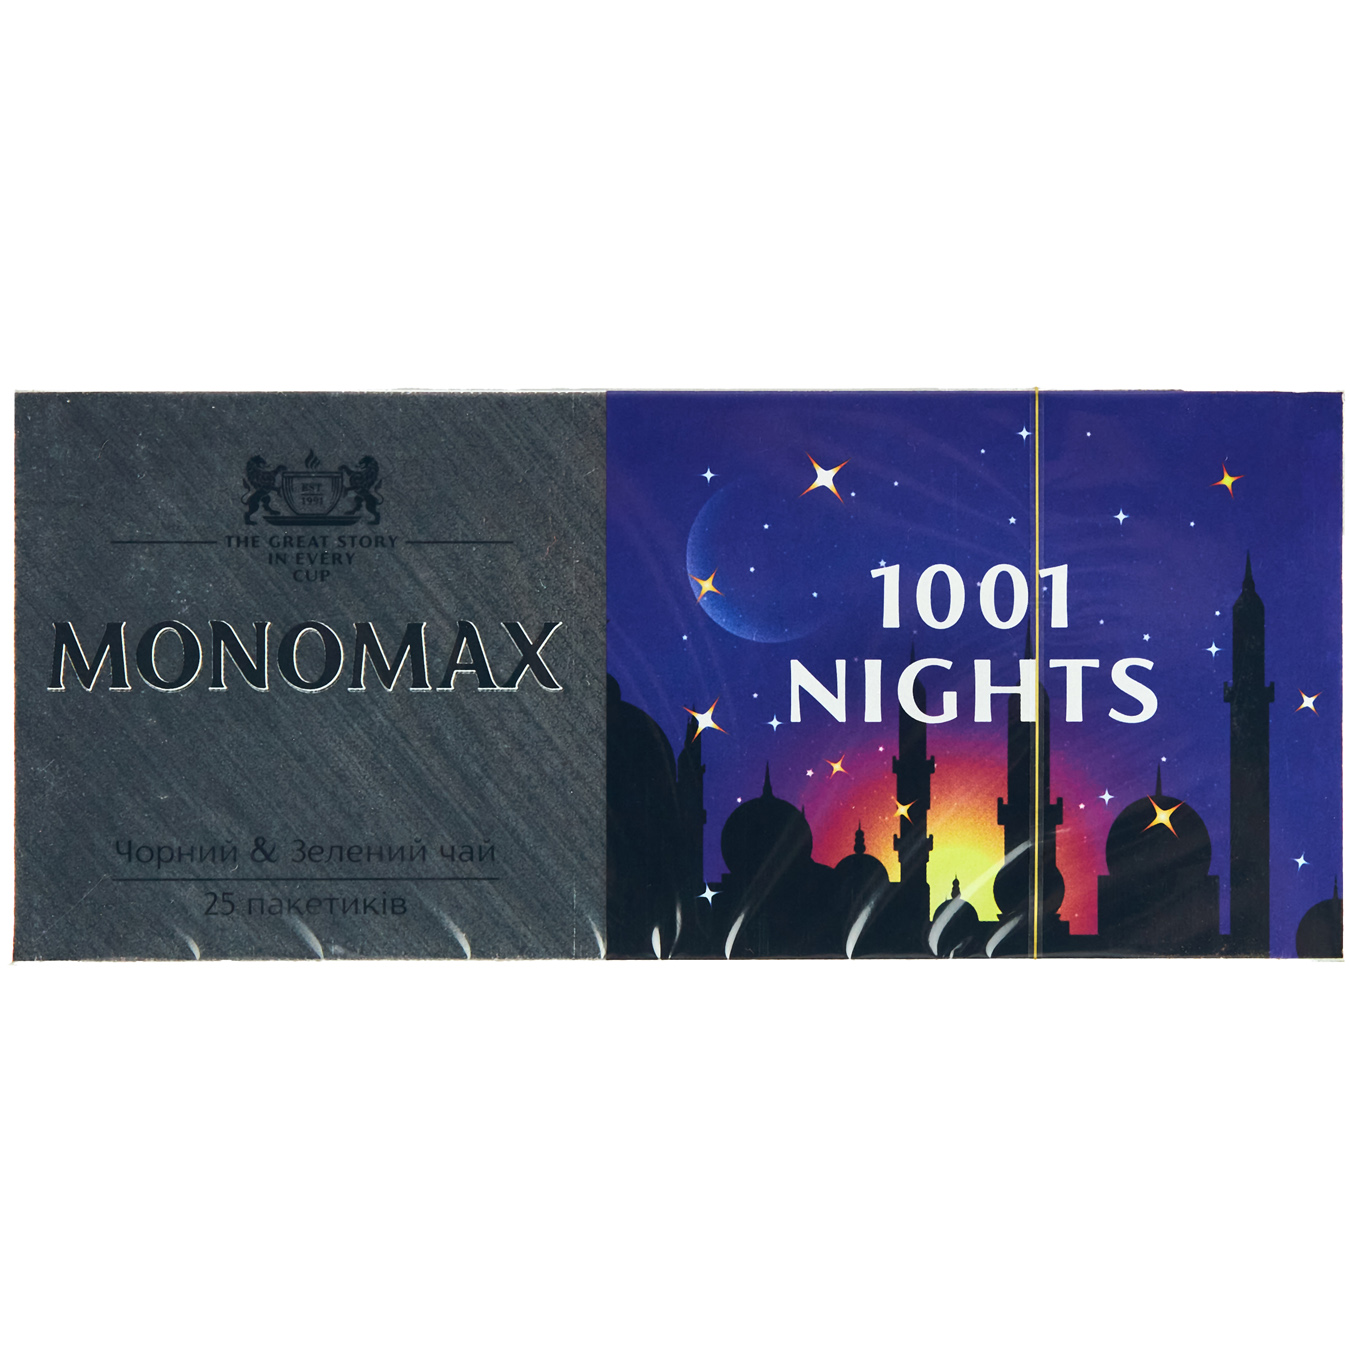 Black and green tea Monomakh 1001 night 375g packaged